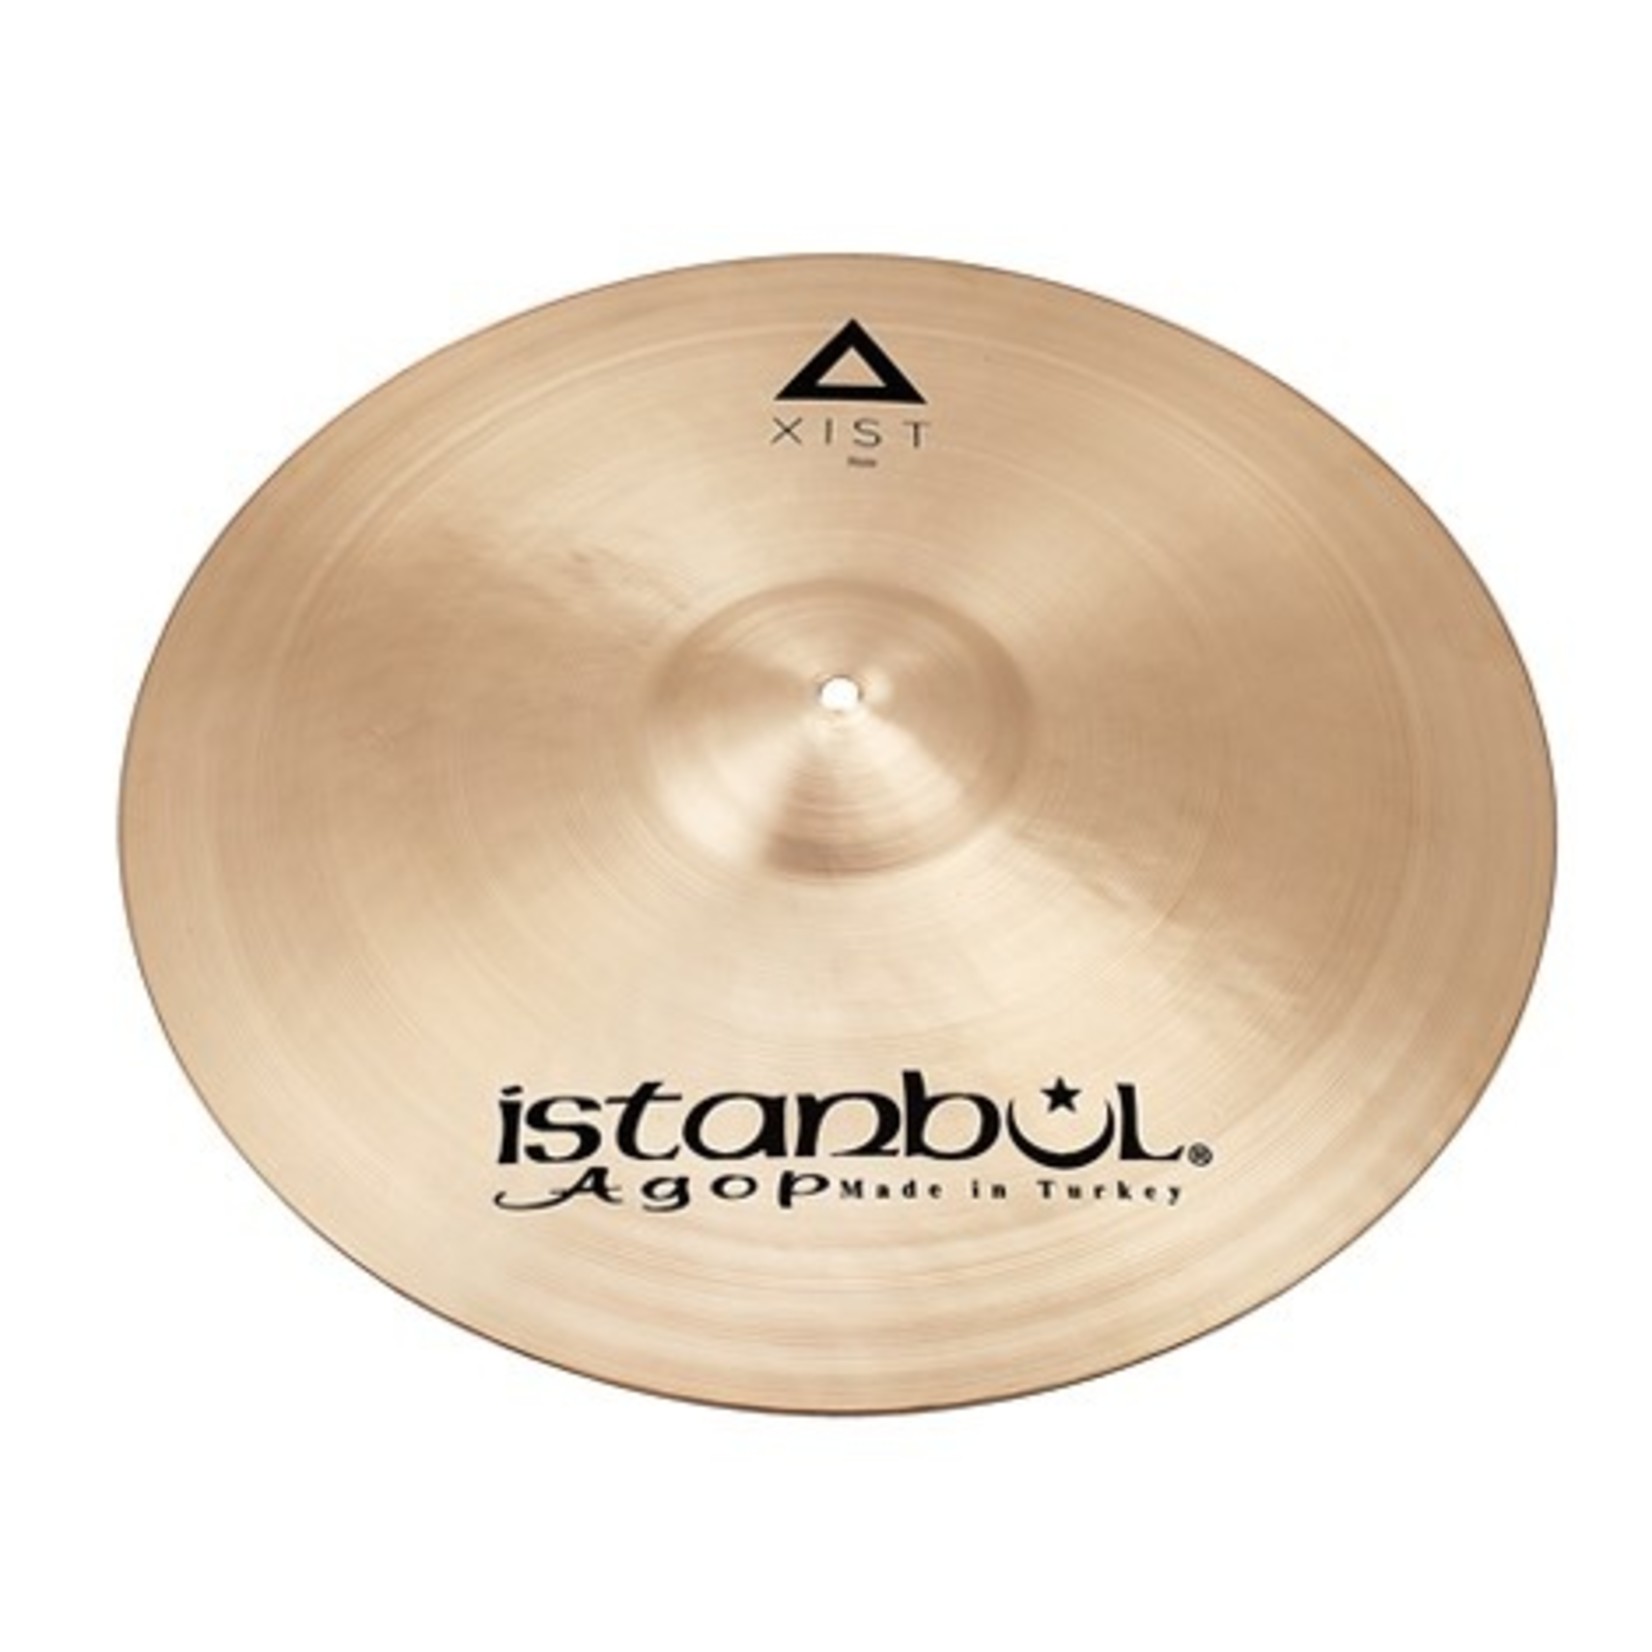 Istanbul Agop Istanbul Agop Xist Natural Ride 20"